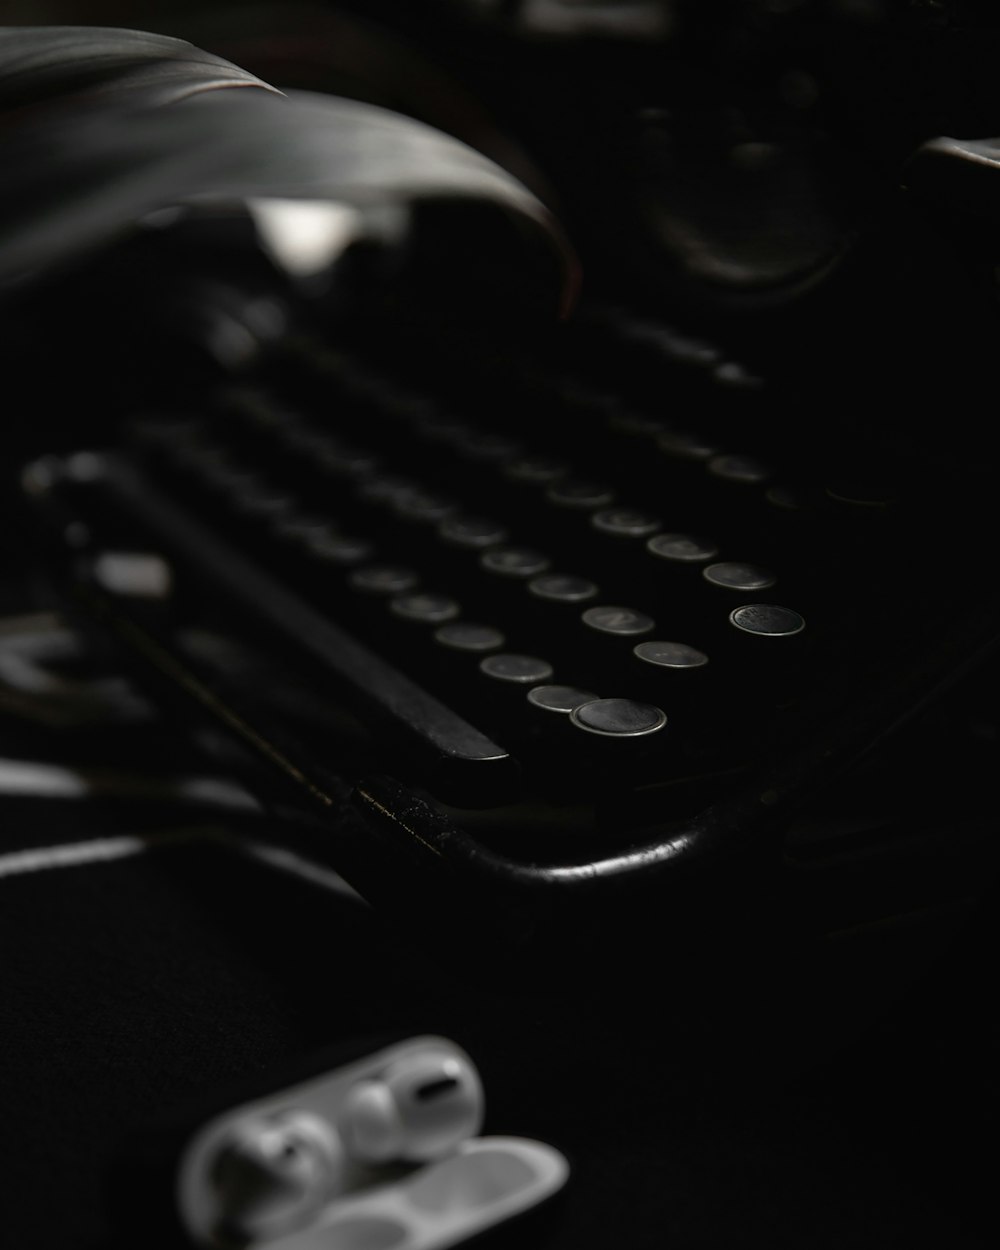 black and silver typewriter on black table